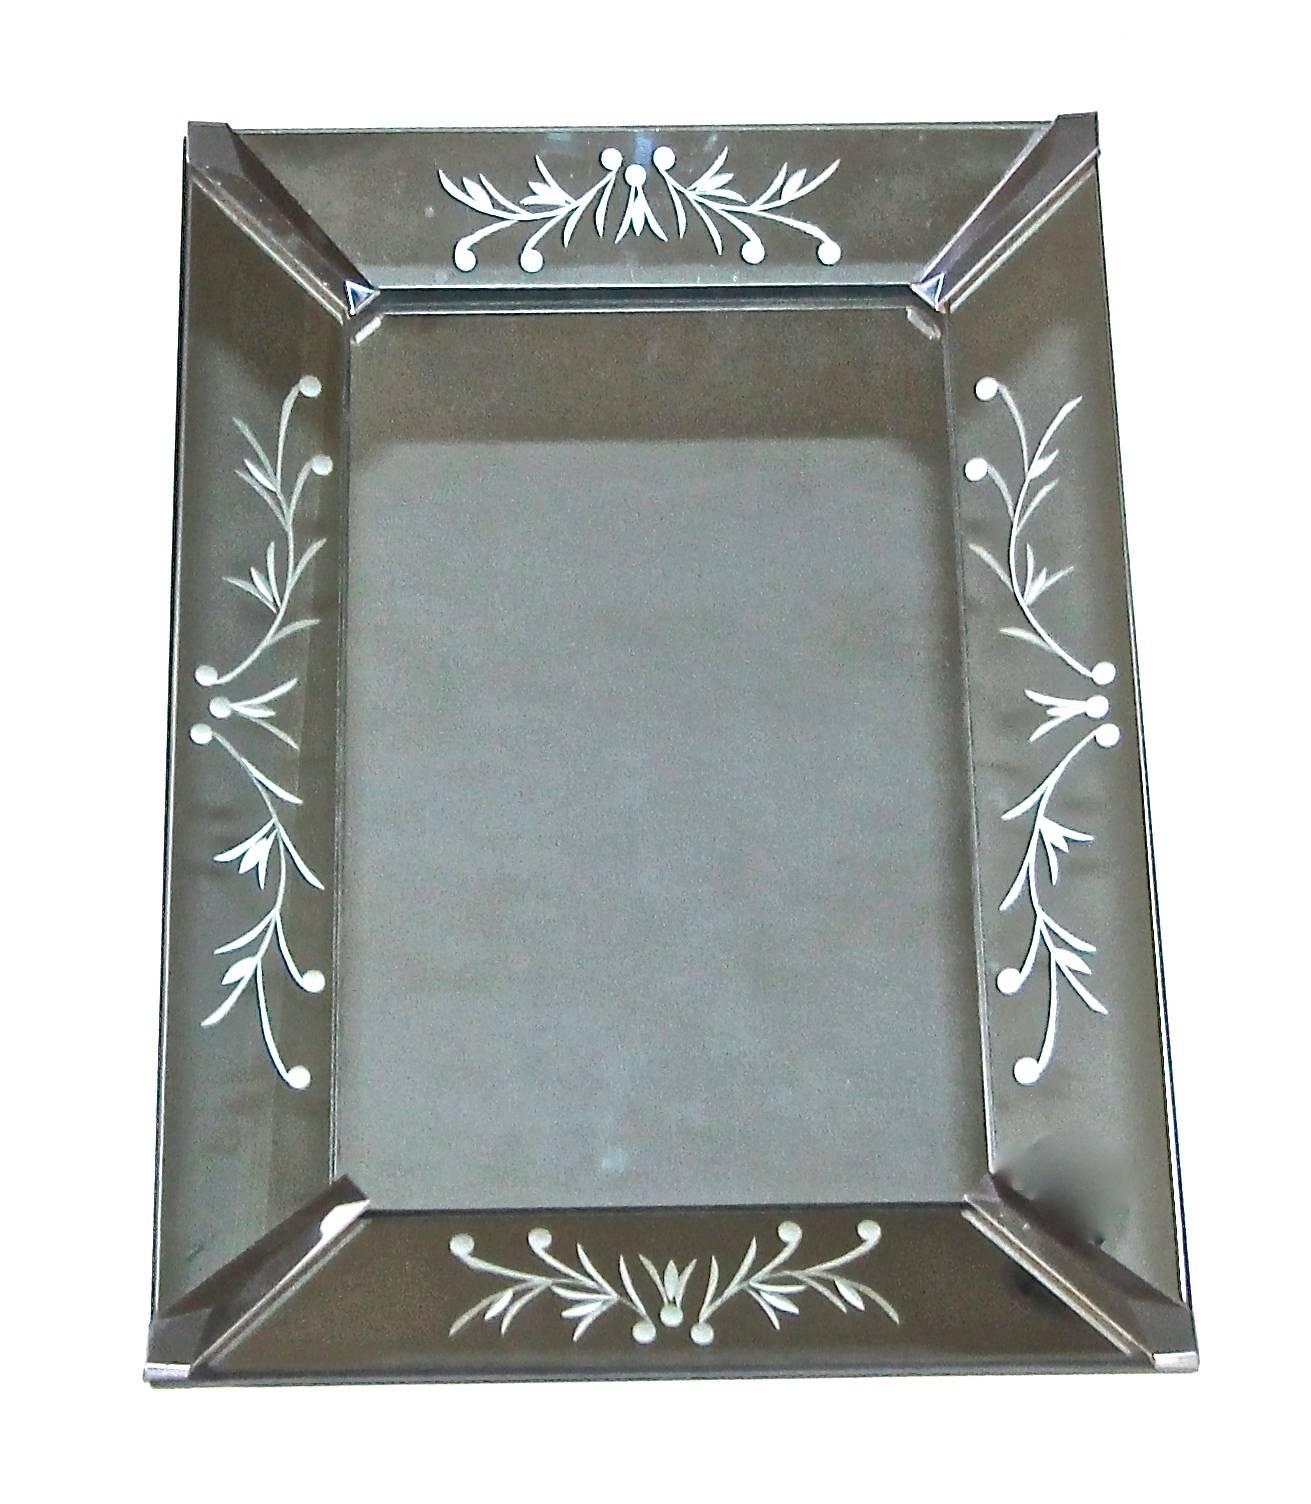 Smaller scale rectangular French deco style wall mirror with chrome corners and reverse etched mirrored panels. Perfect scale for powder room.